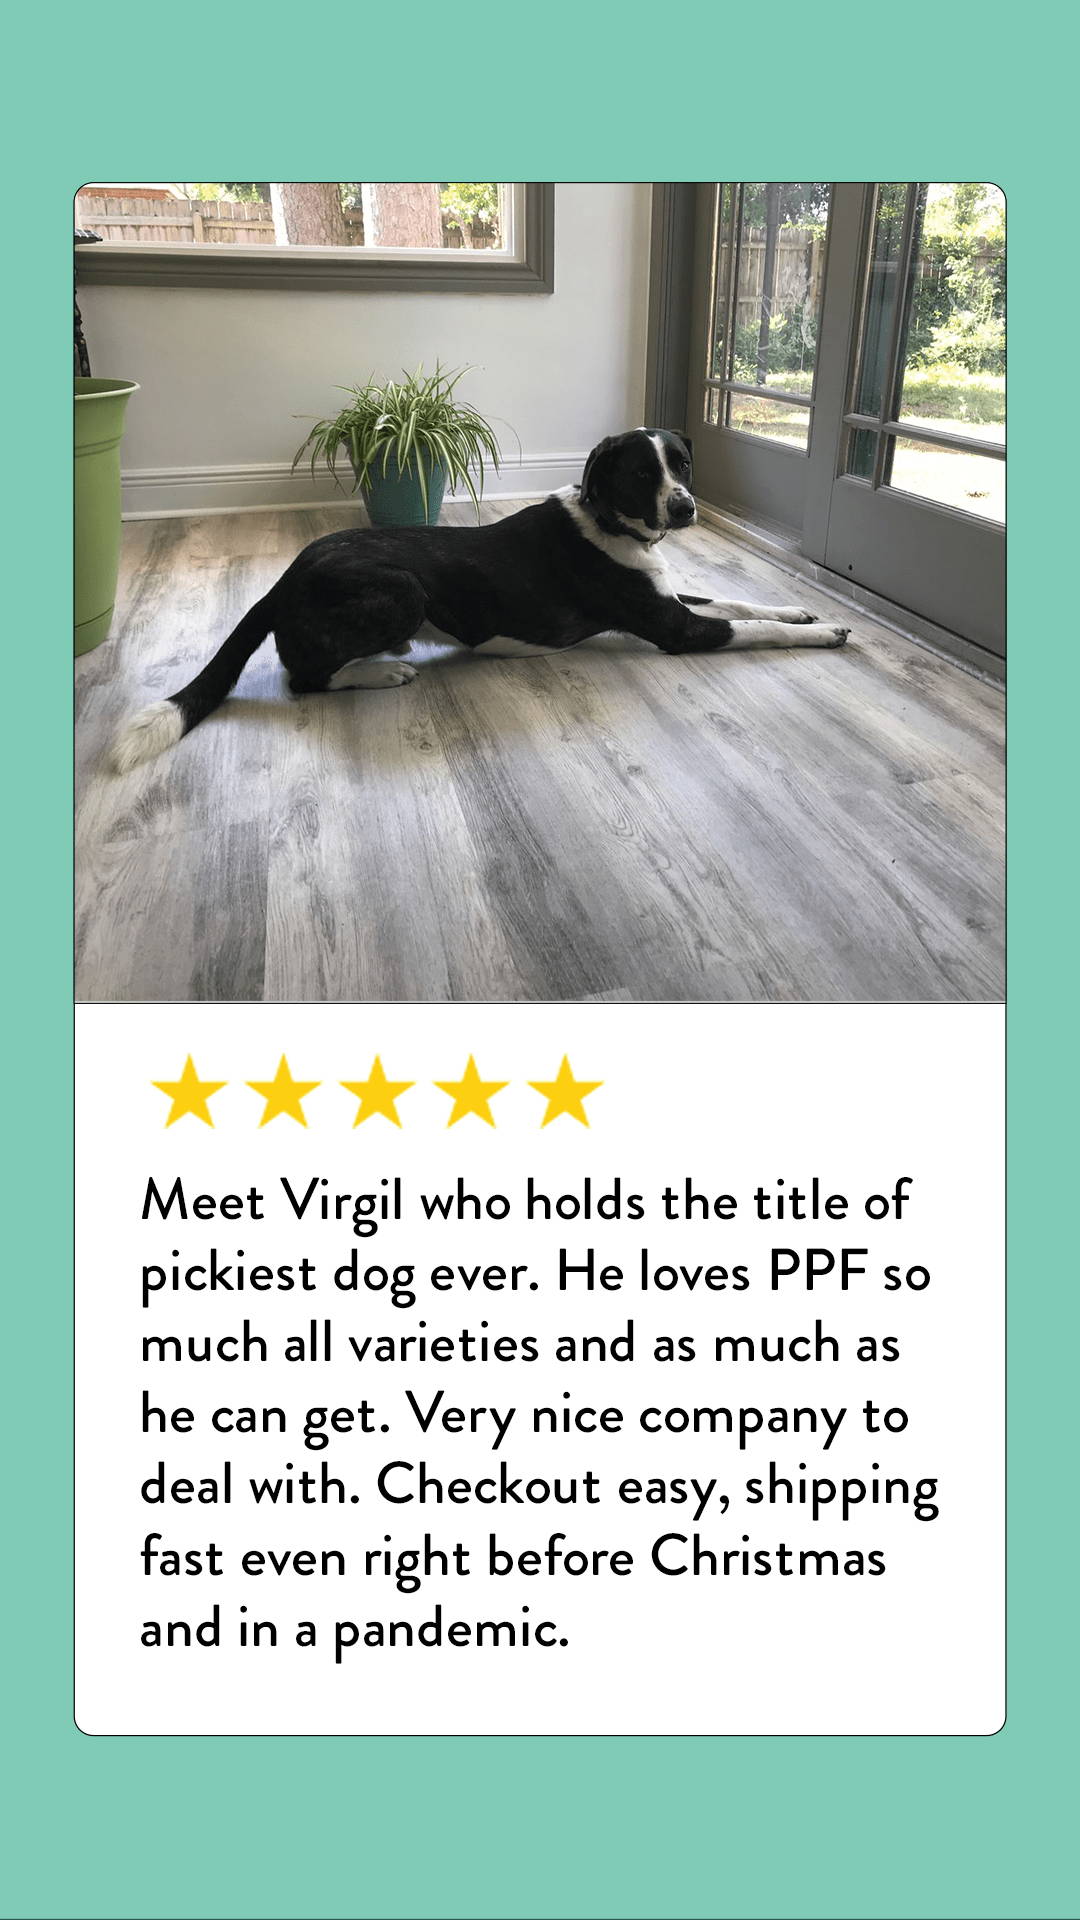 A picture of Virgil, a dog who was described as no longer a picky eater in a review from its owner now that they found Portland Pet Food.